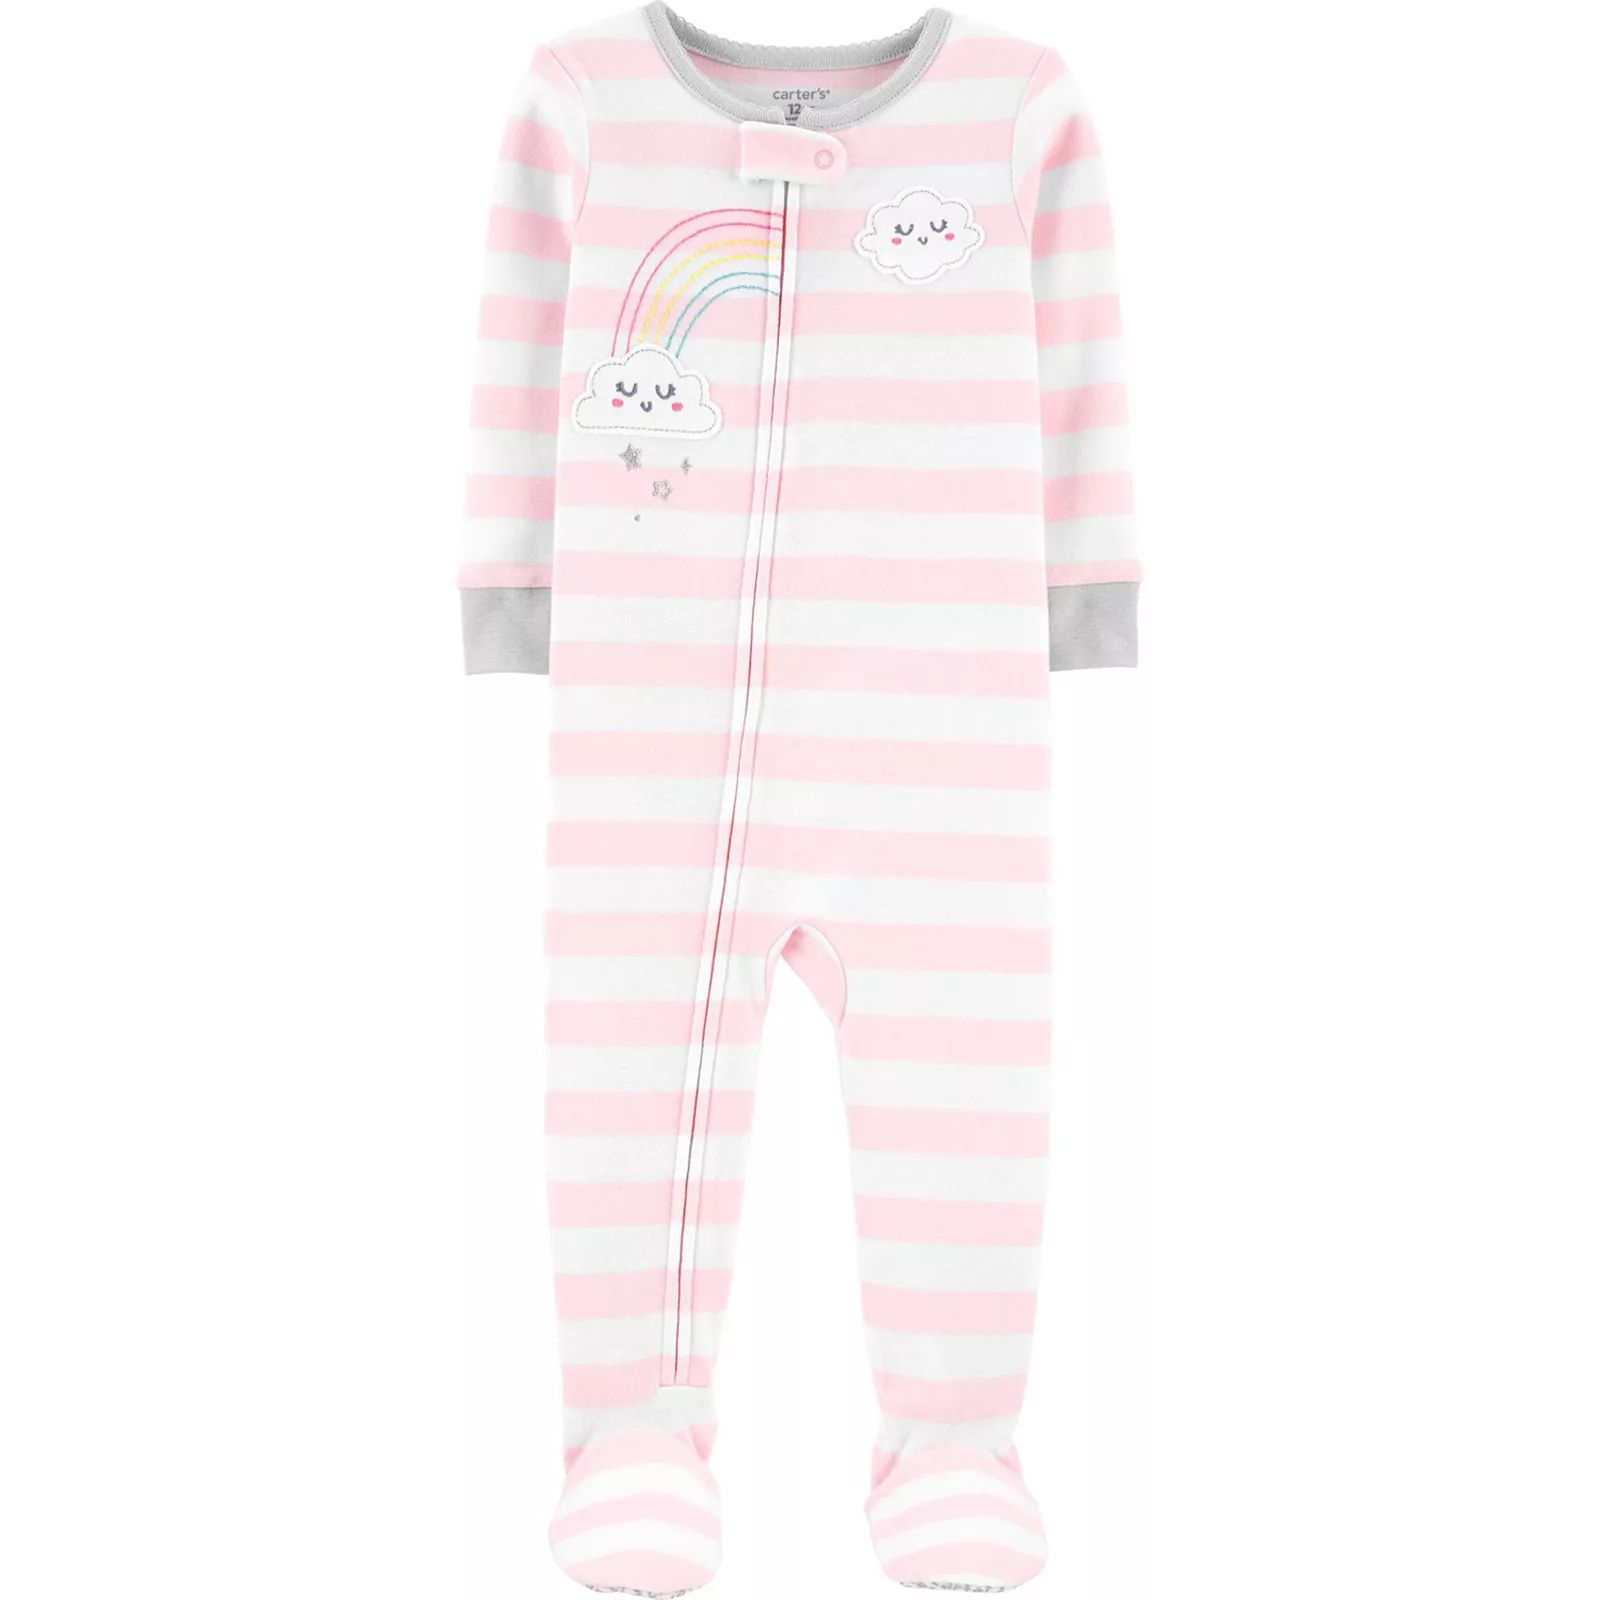 Toddler Girl Carter's Rainbow Clouds Striped Footie Pajamas, Toddler Girl's, Size: 5T, Pink White | Kohl's